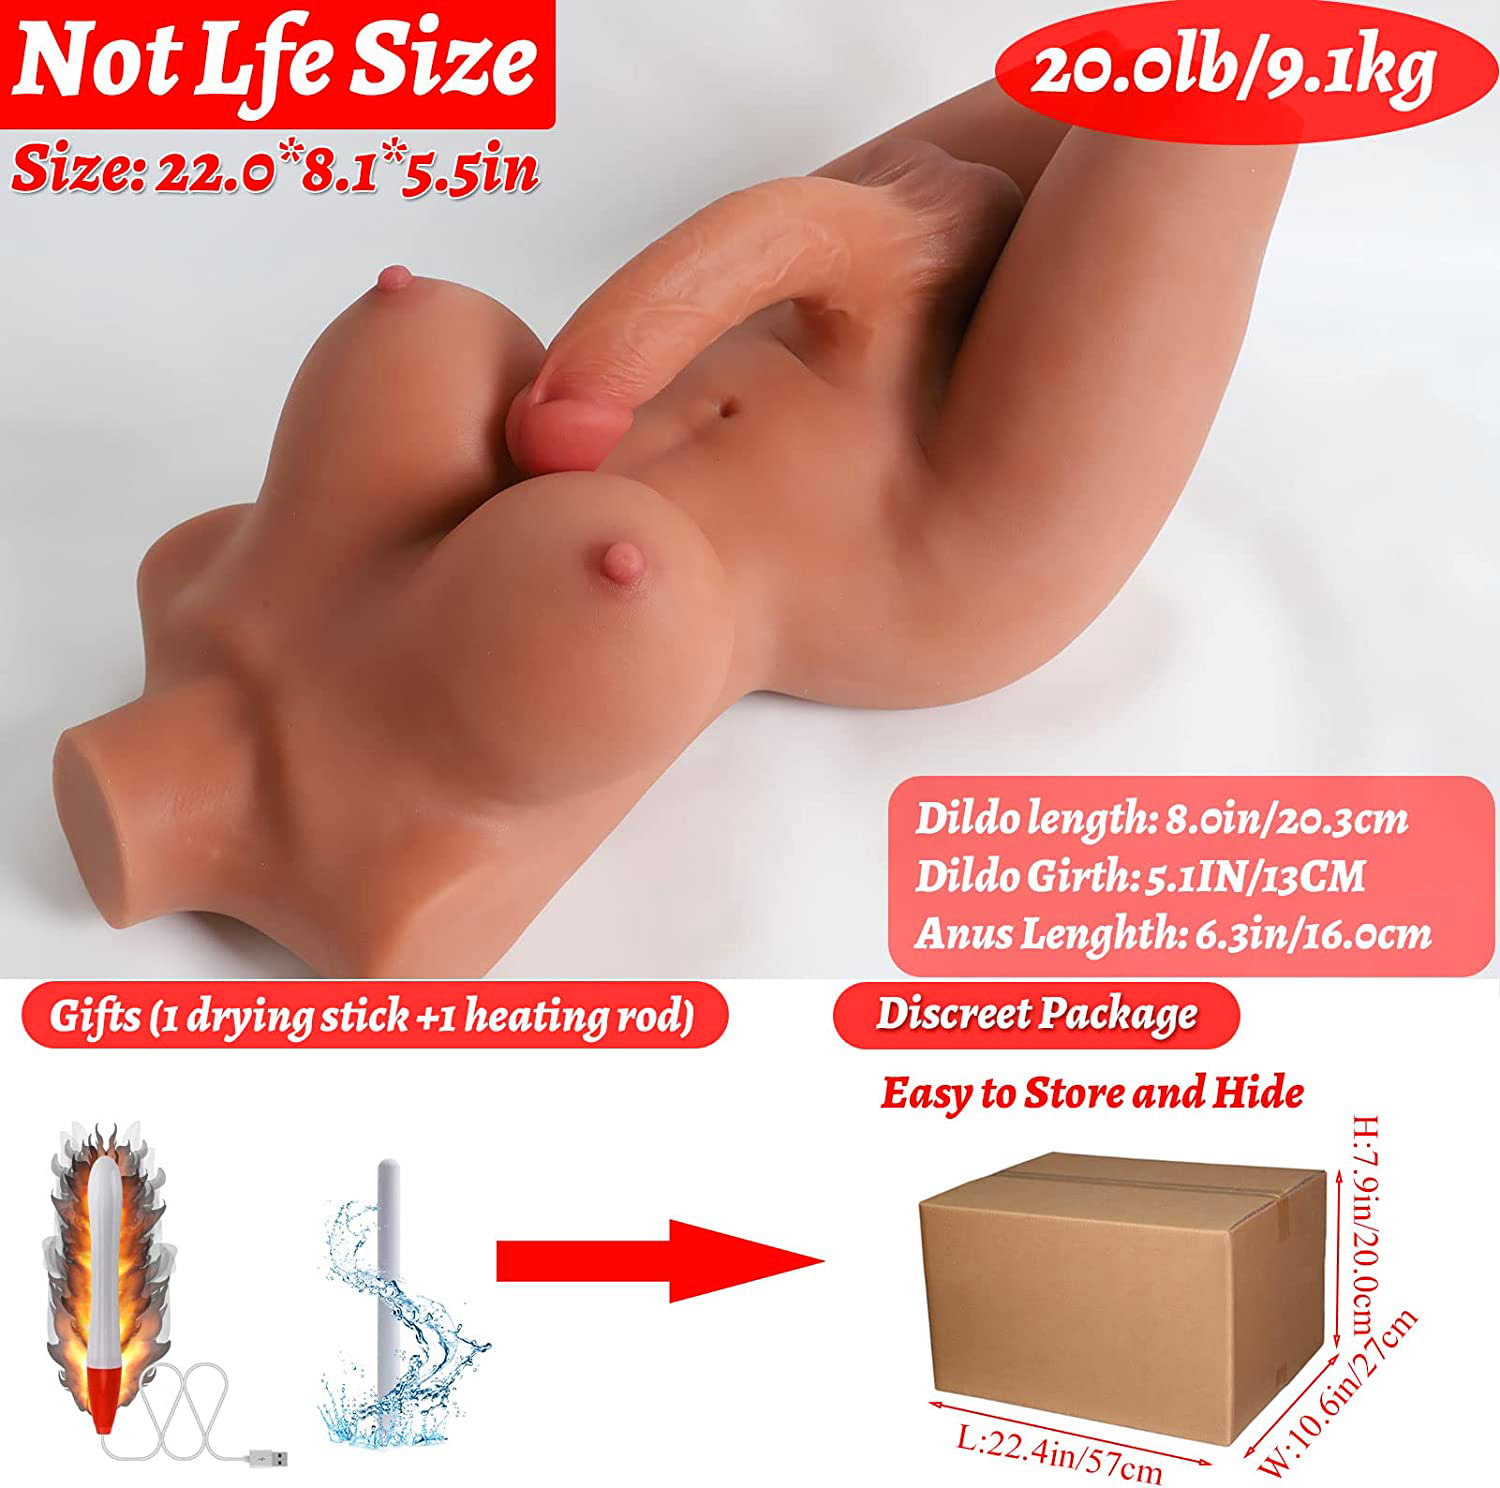 Hugh Penis Silicone Breast Anal Testicles Unisex Masturbator for Men Women Gay Couple Adult Sex Toy Brown 20lb Shemale Sex Doll Torso Lifelike Transsexual
